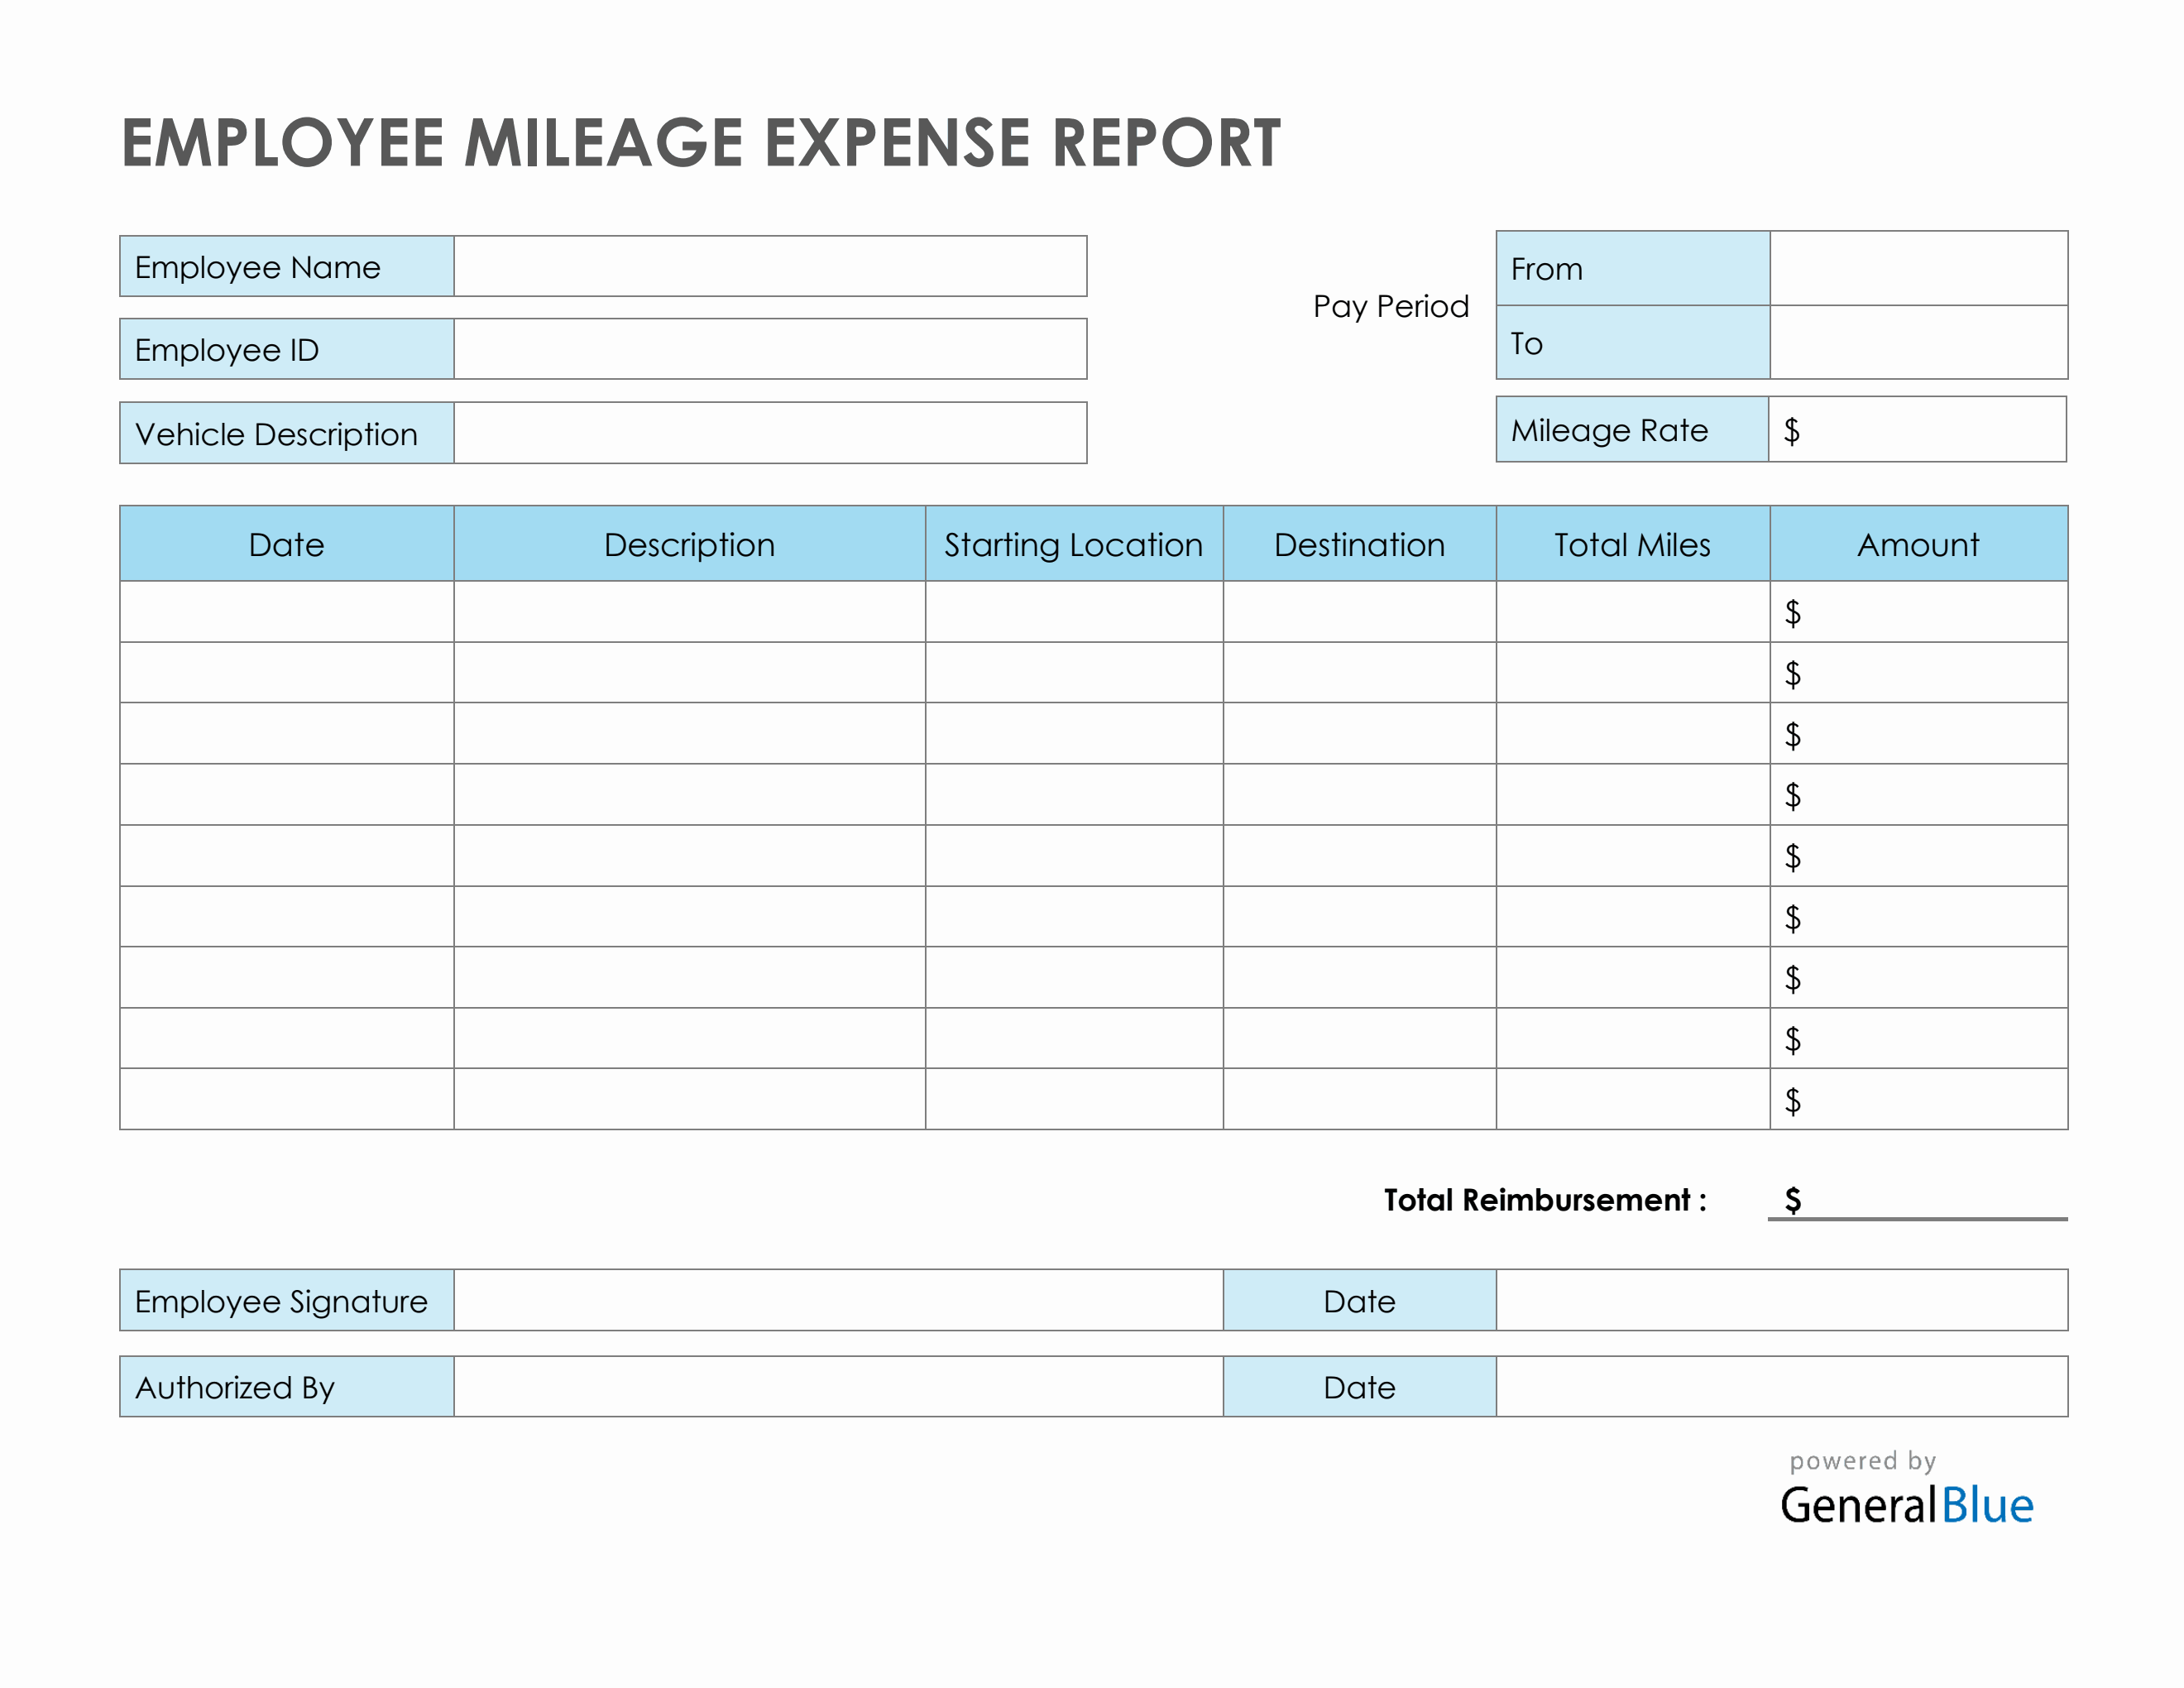 Employee Mileage Expense Report Template in Word Within Mileage Report Template